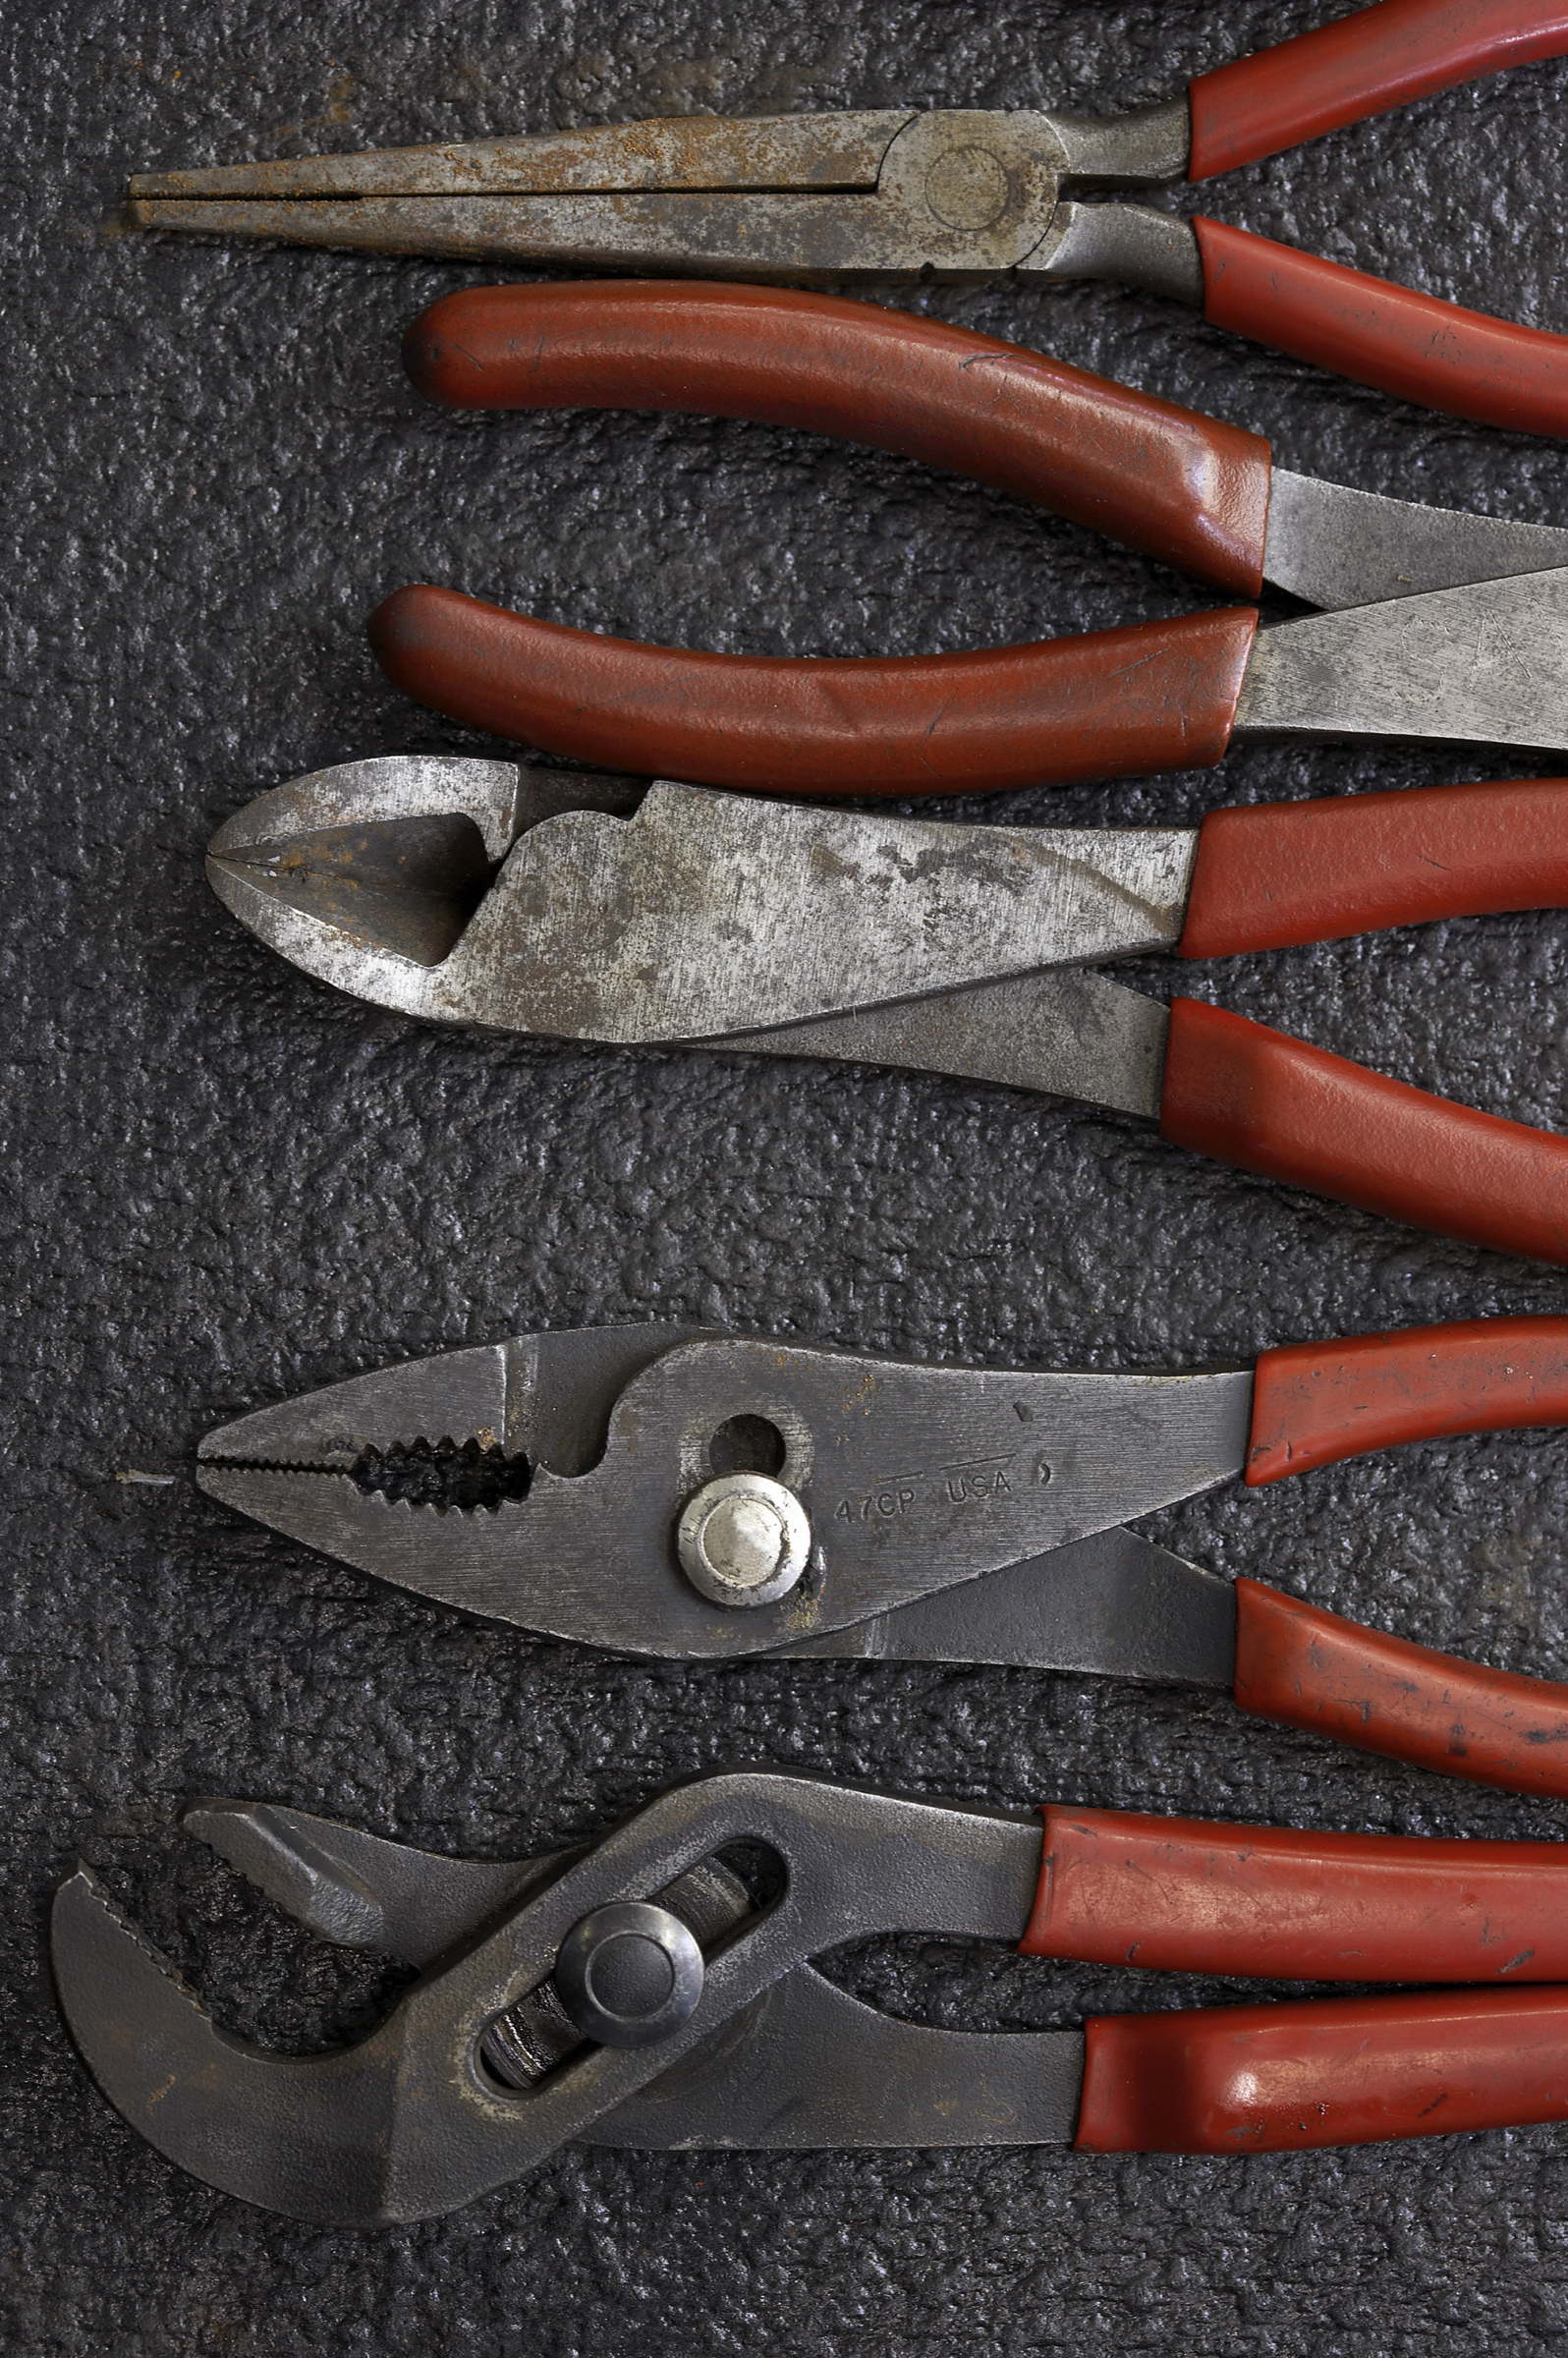 various tools such as pliers and clamps